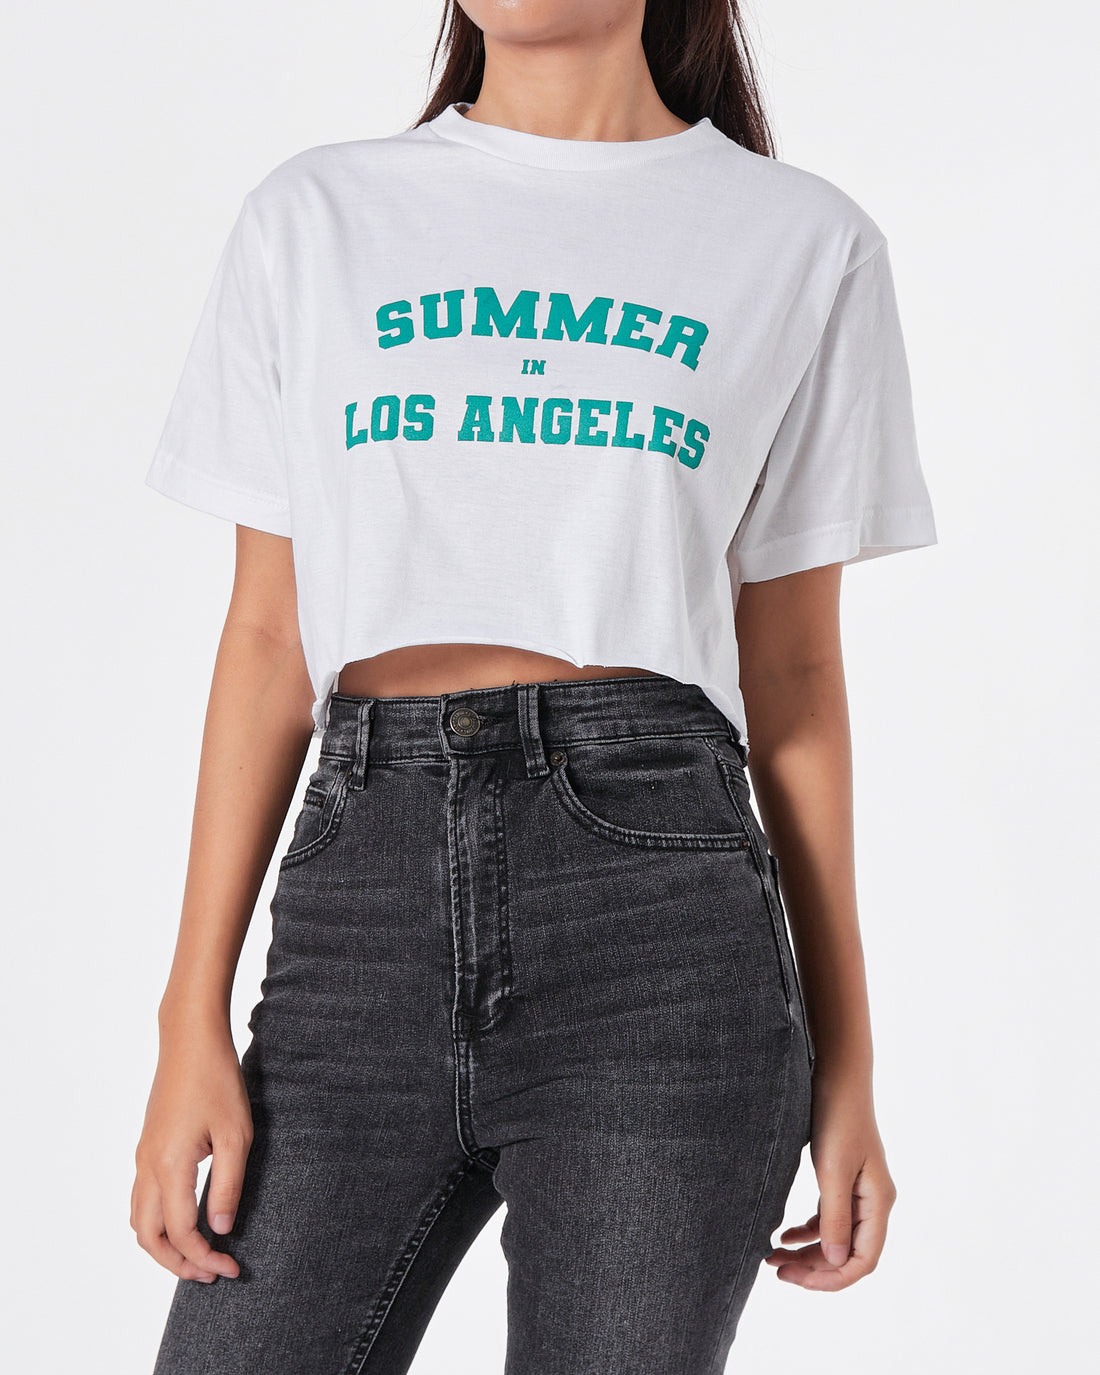 Summer In Los Angeles Lady White T-Shirt Crop Top 9.90